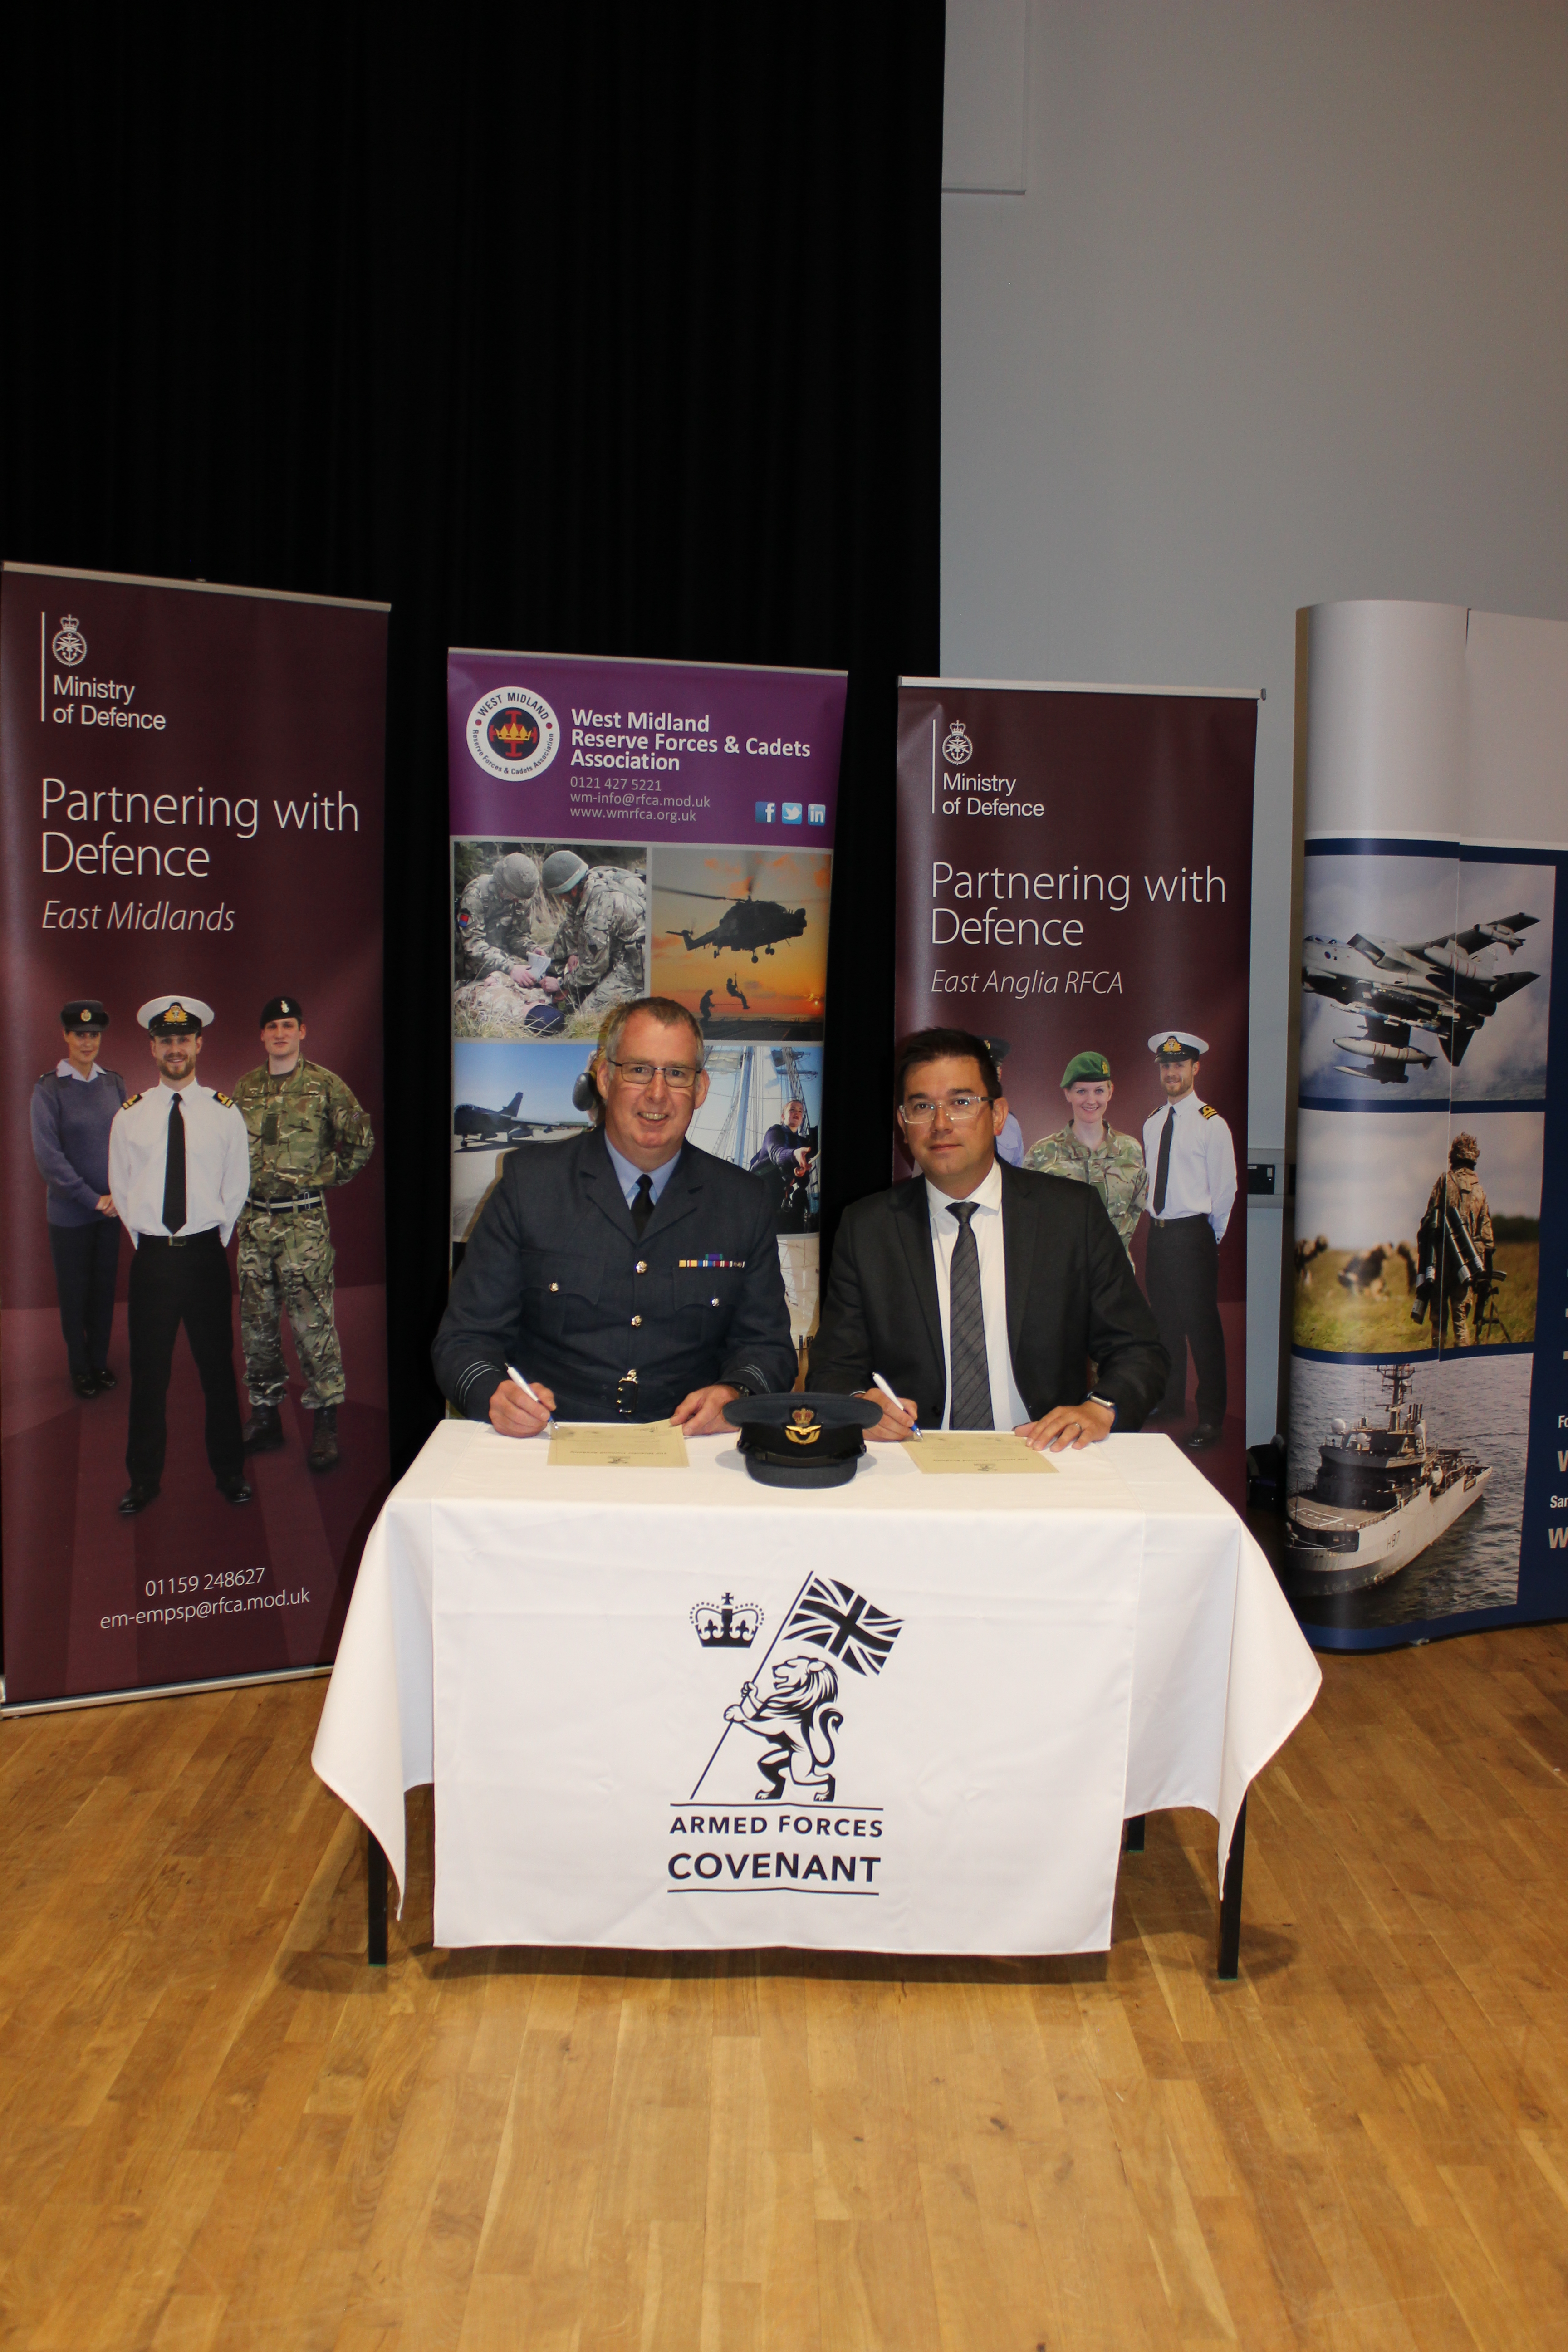 The Nicholas Hamond Academy signs the Armed Forces Covenant